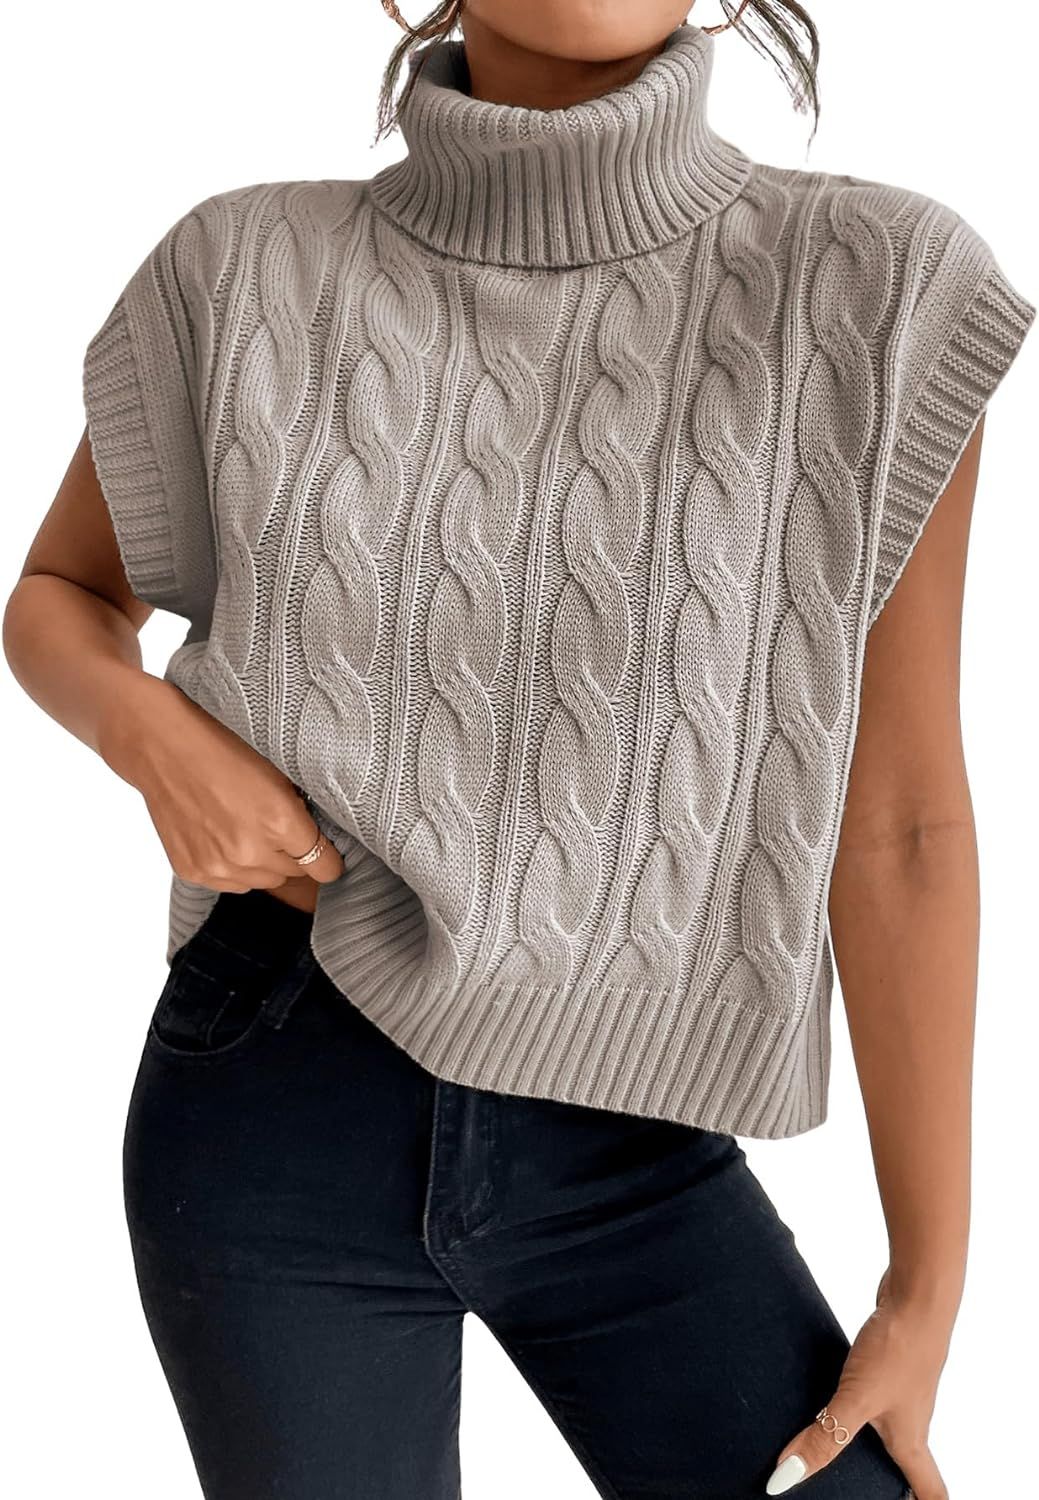 SweatyRocks Women's Casual Sleeveless Turtle Neck Sweater Vest Cable Knitted Solid Crop Tank Top | Amazon (US)